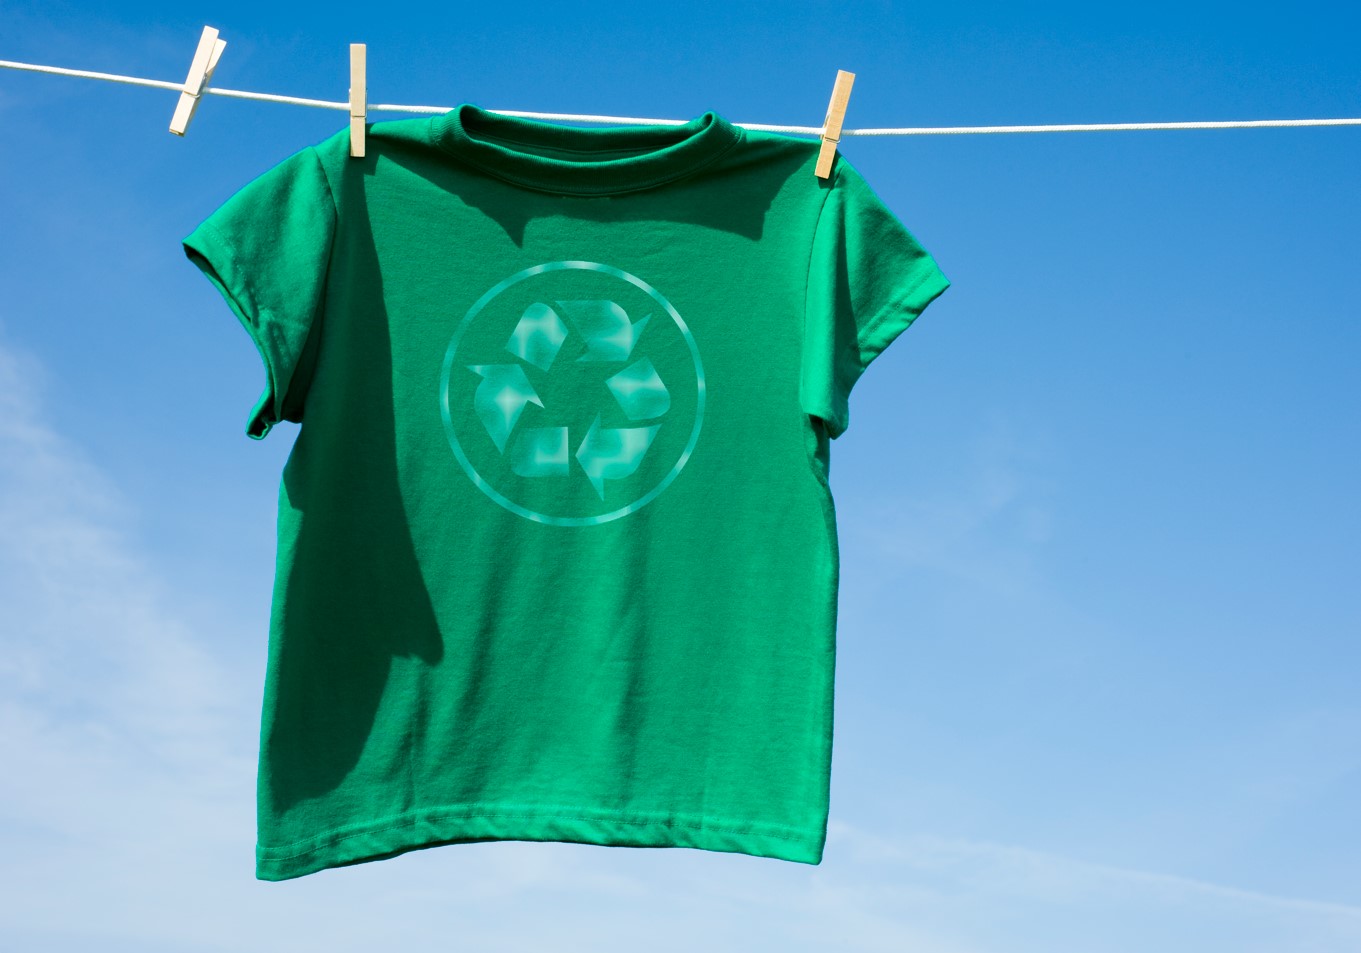 Green t-shirt with a recycle logo, Getty